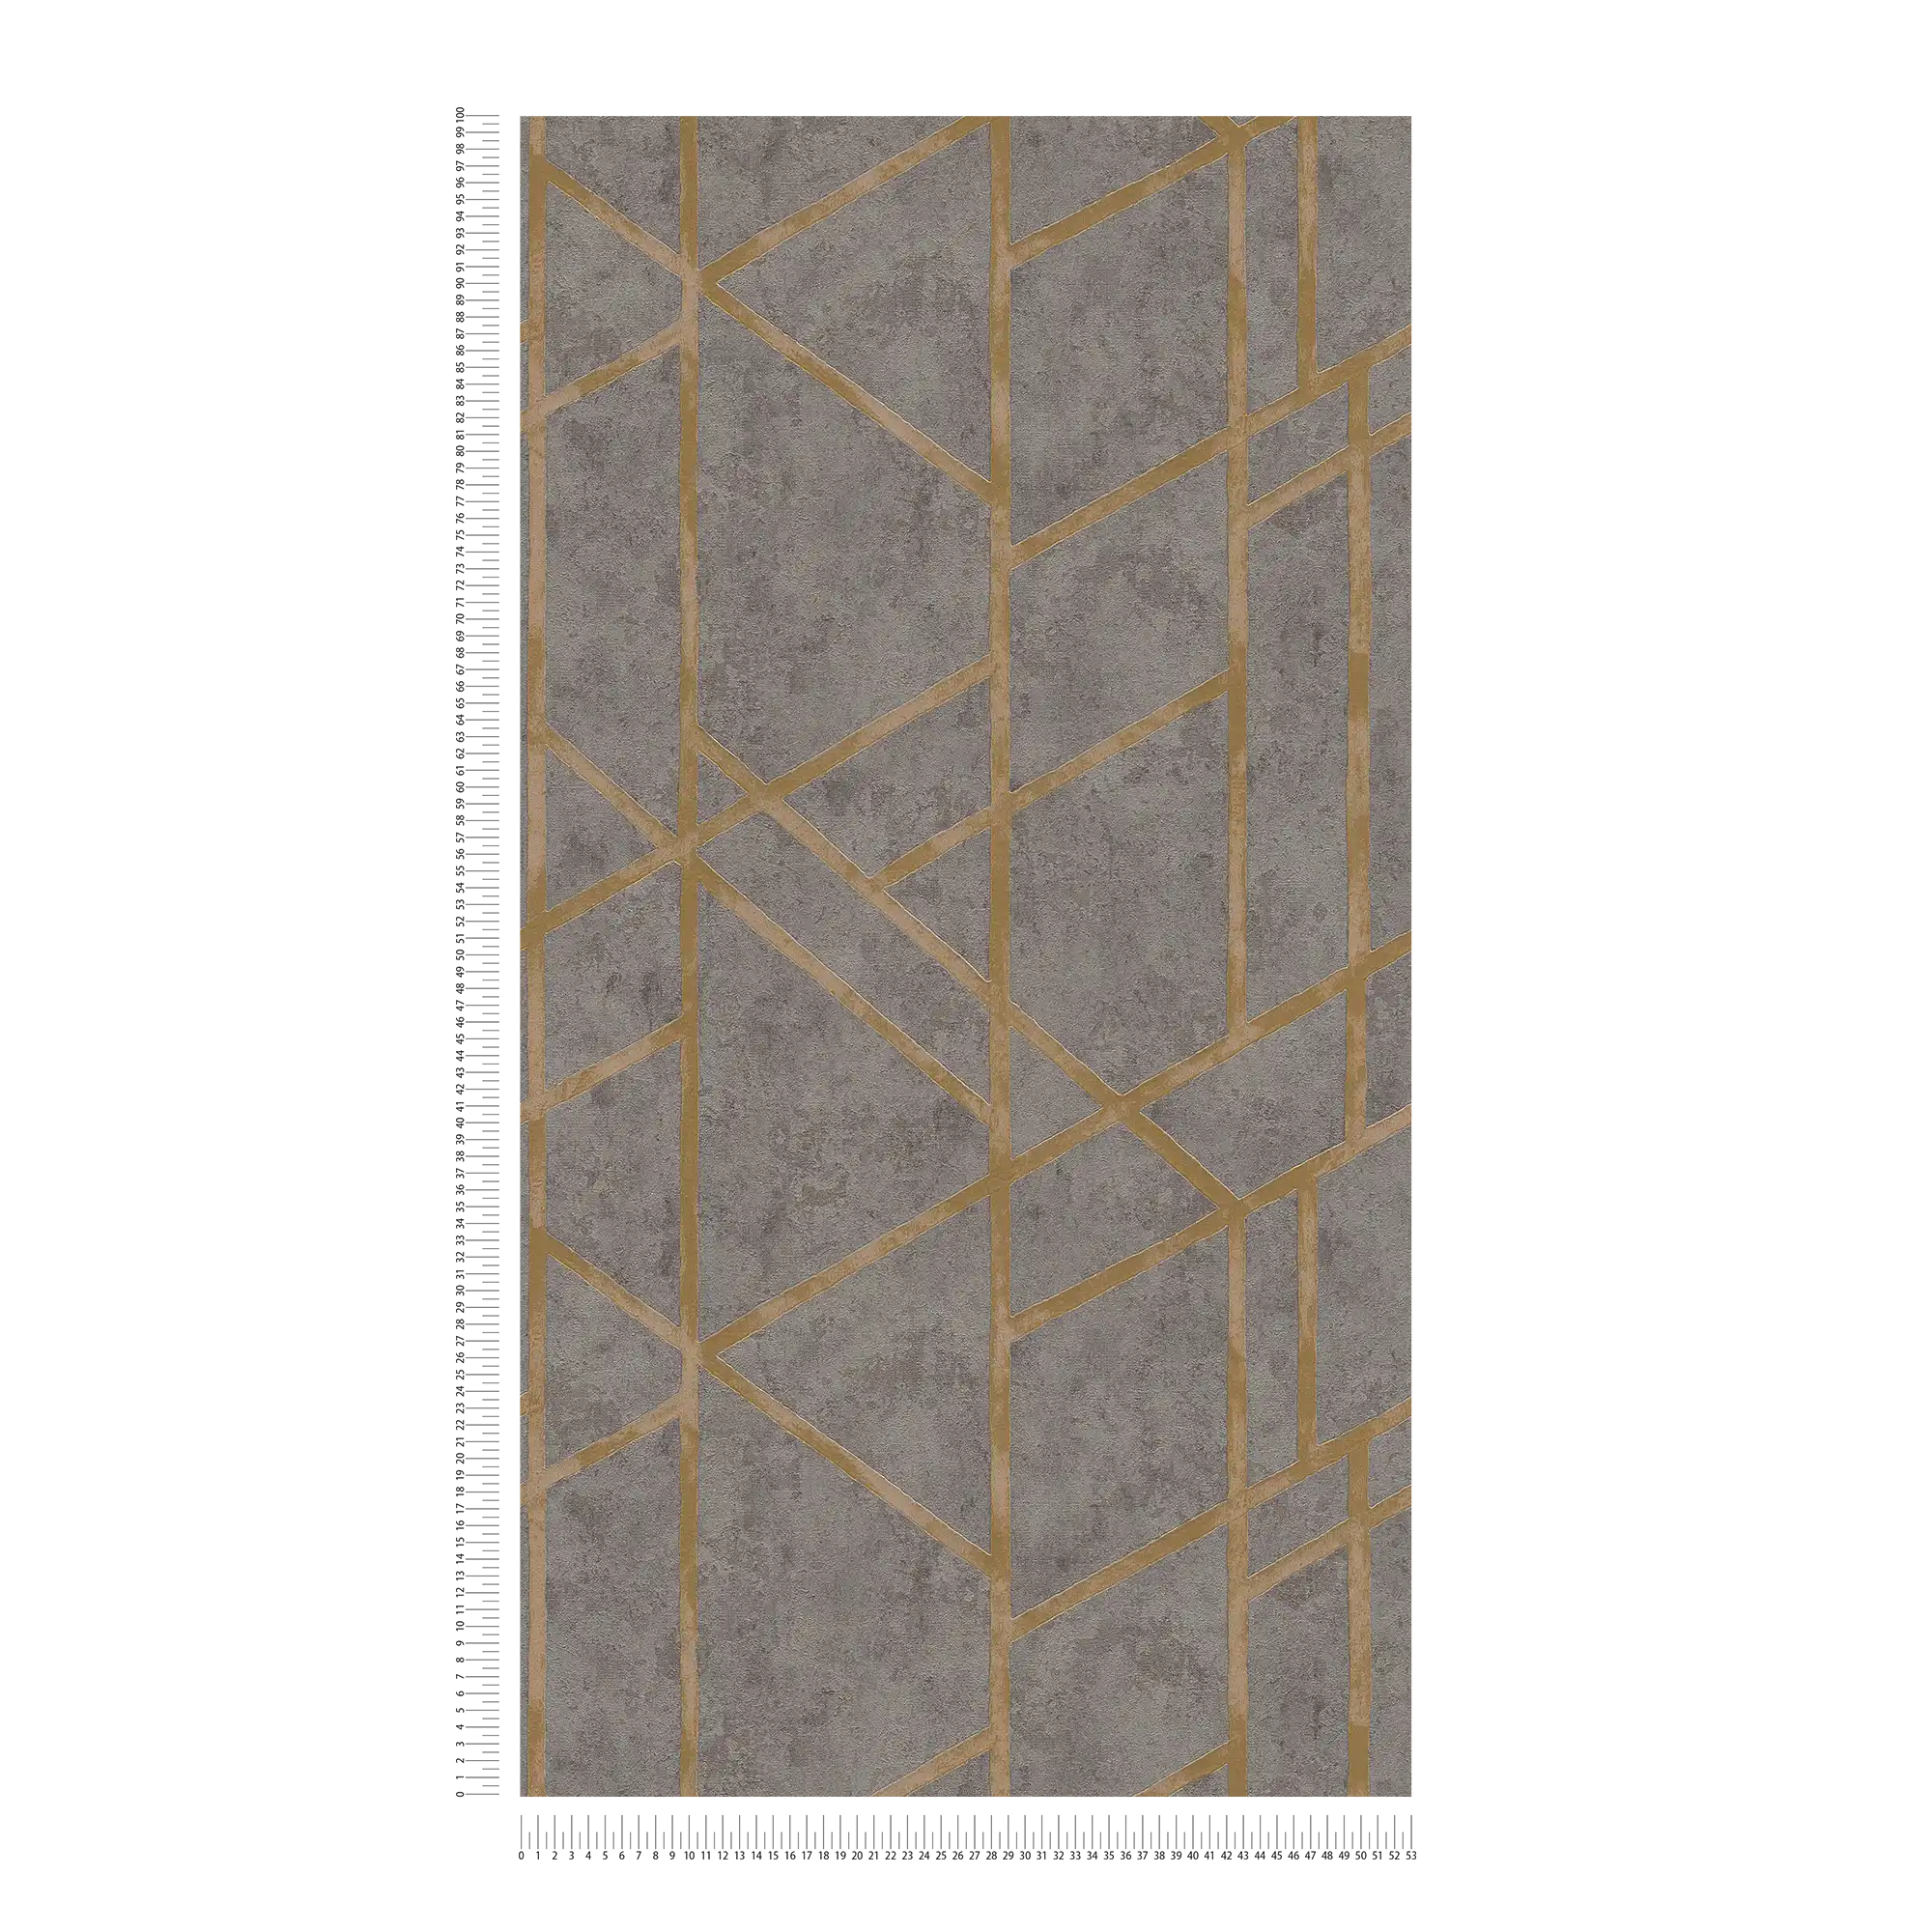             Concrete wallpaper with golden lines pattern - grey, gold
        